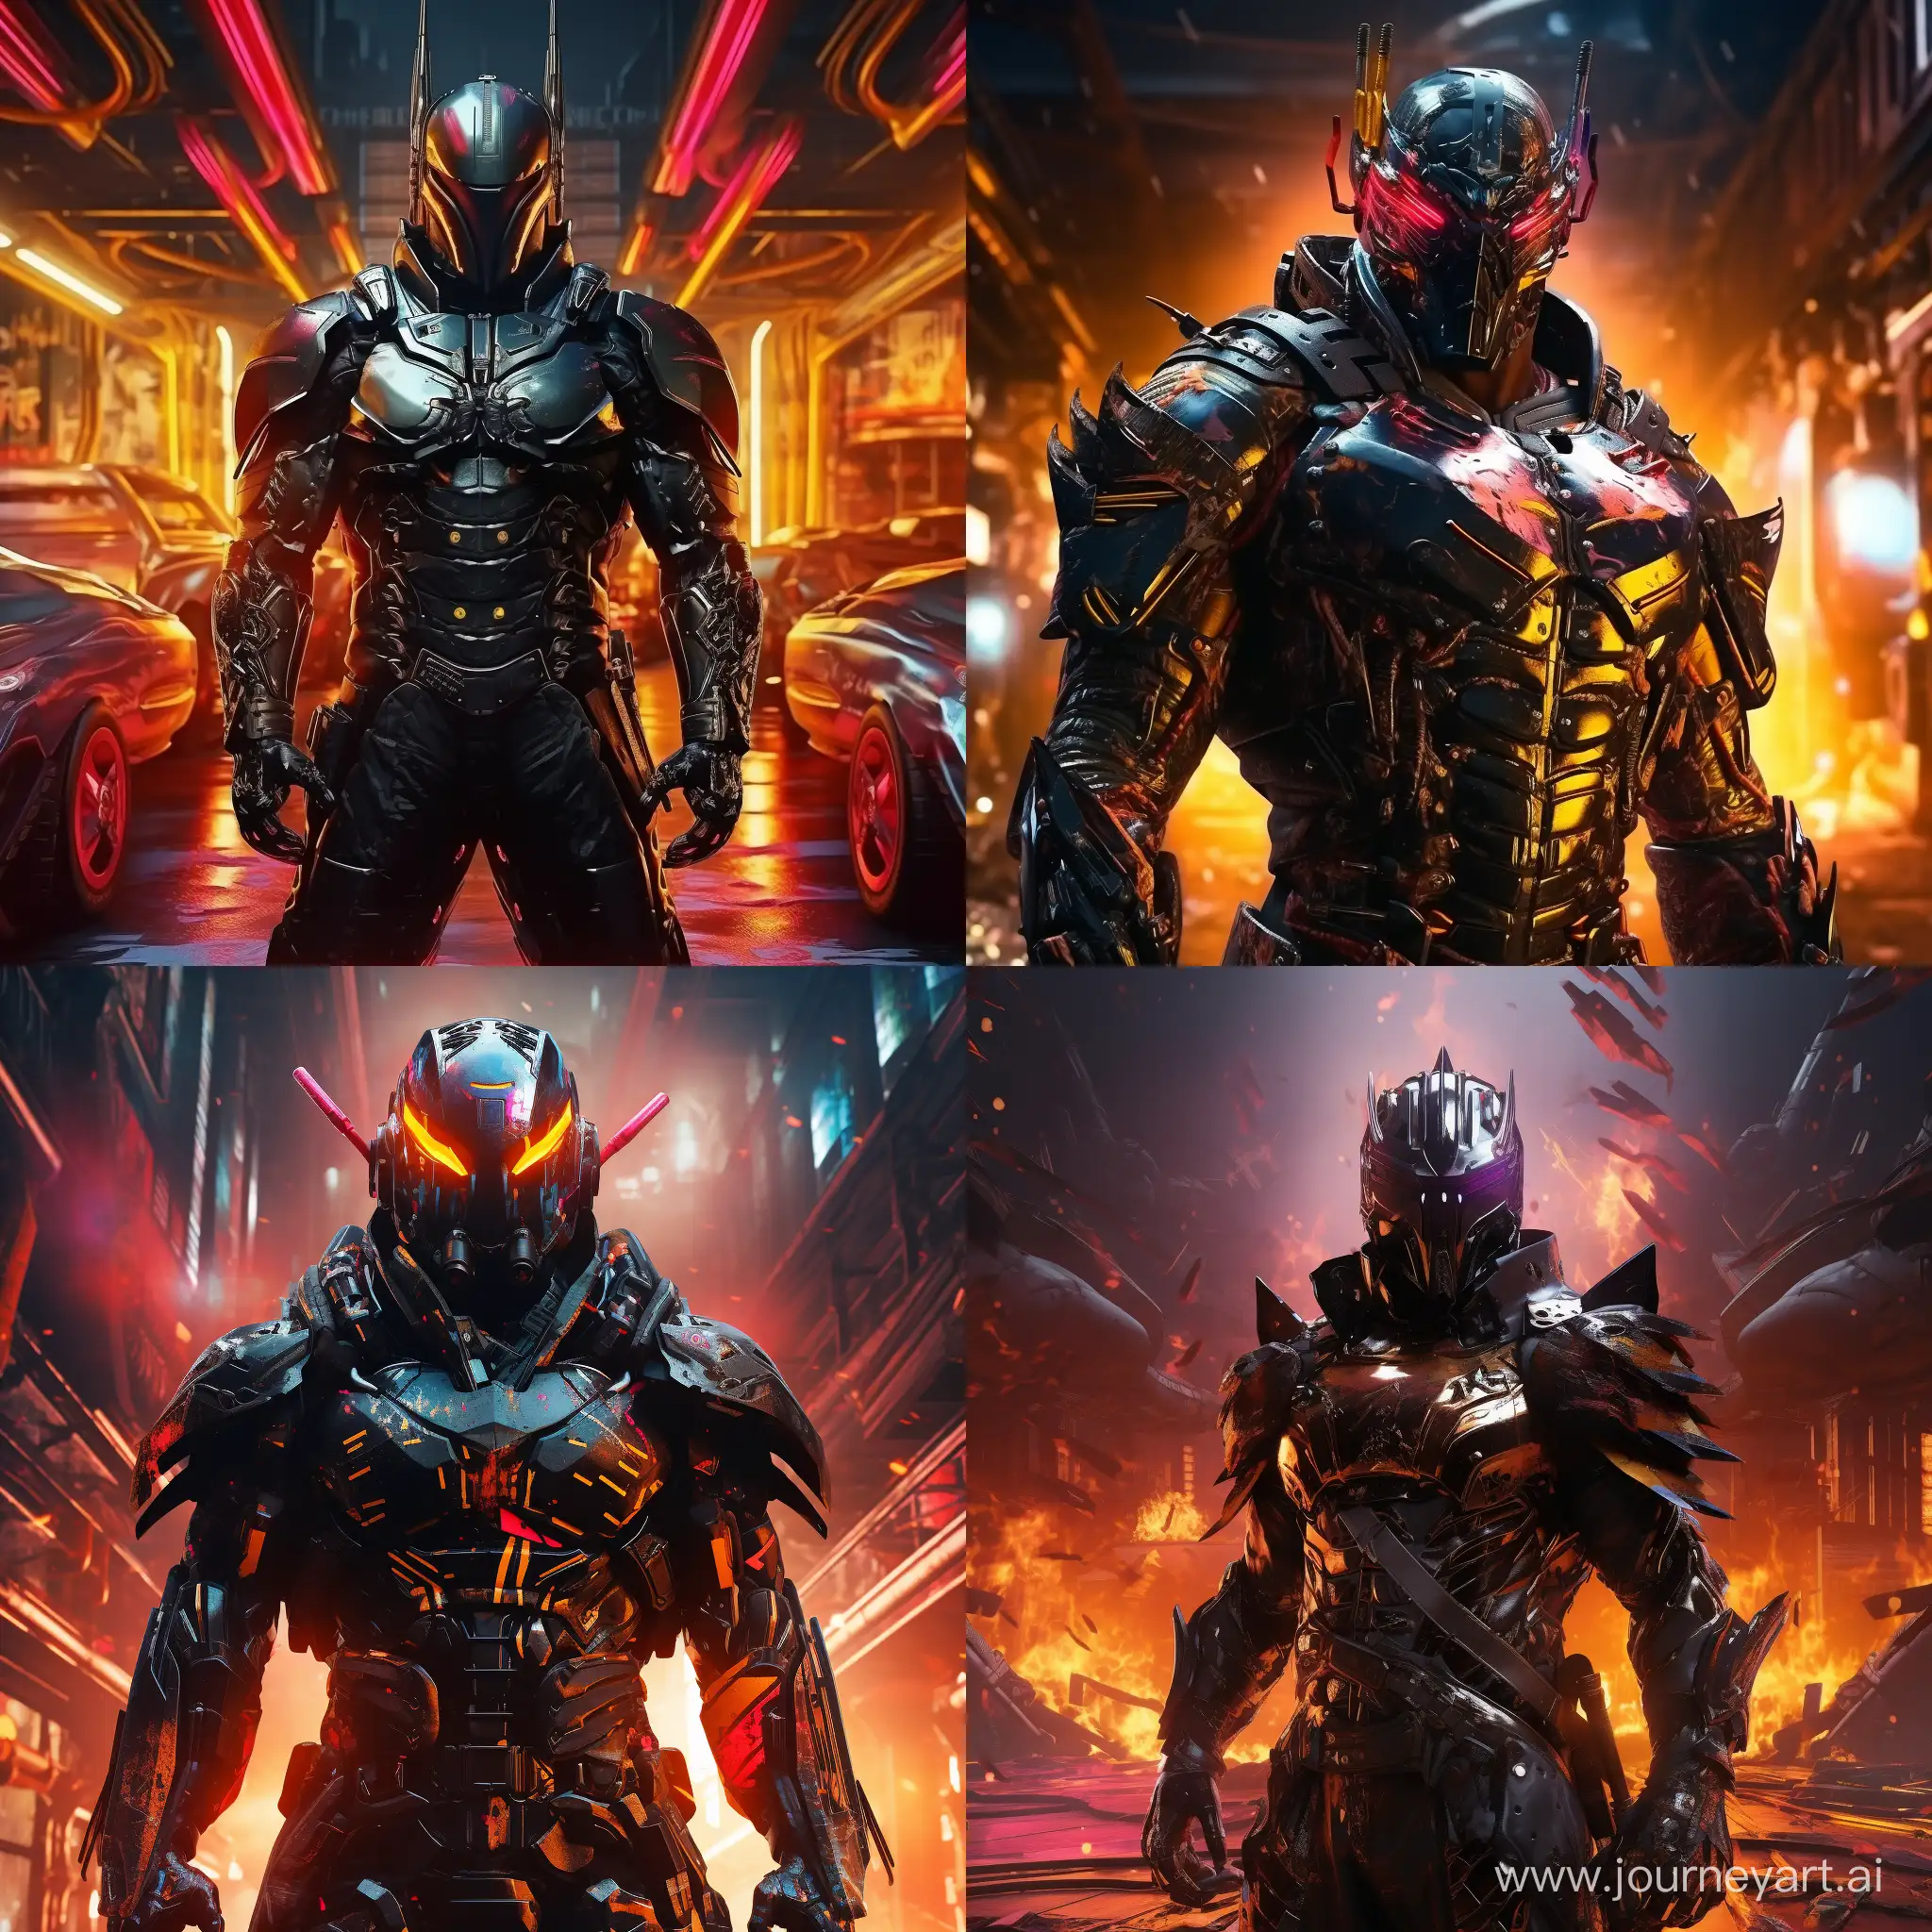 8K, realism, V-Ray, Full length portrait, a black knight racer in armor stands at full height, in cyberpunk style, an explosion of colors, abstraction